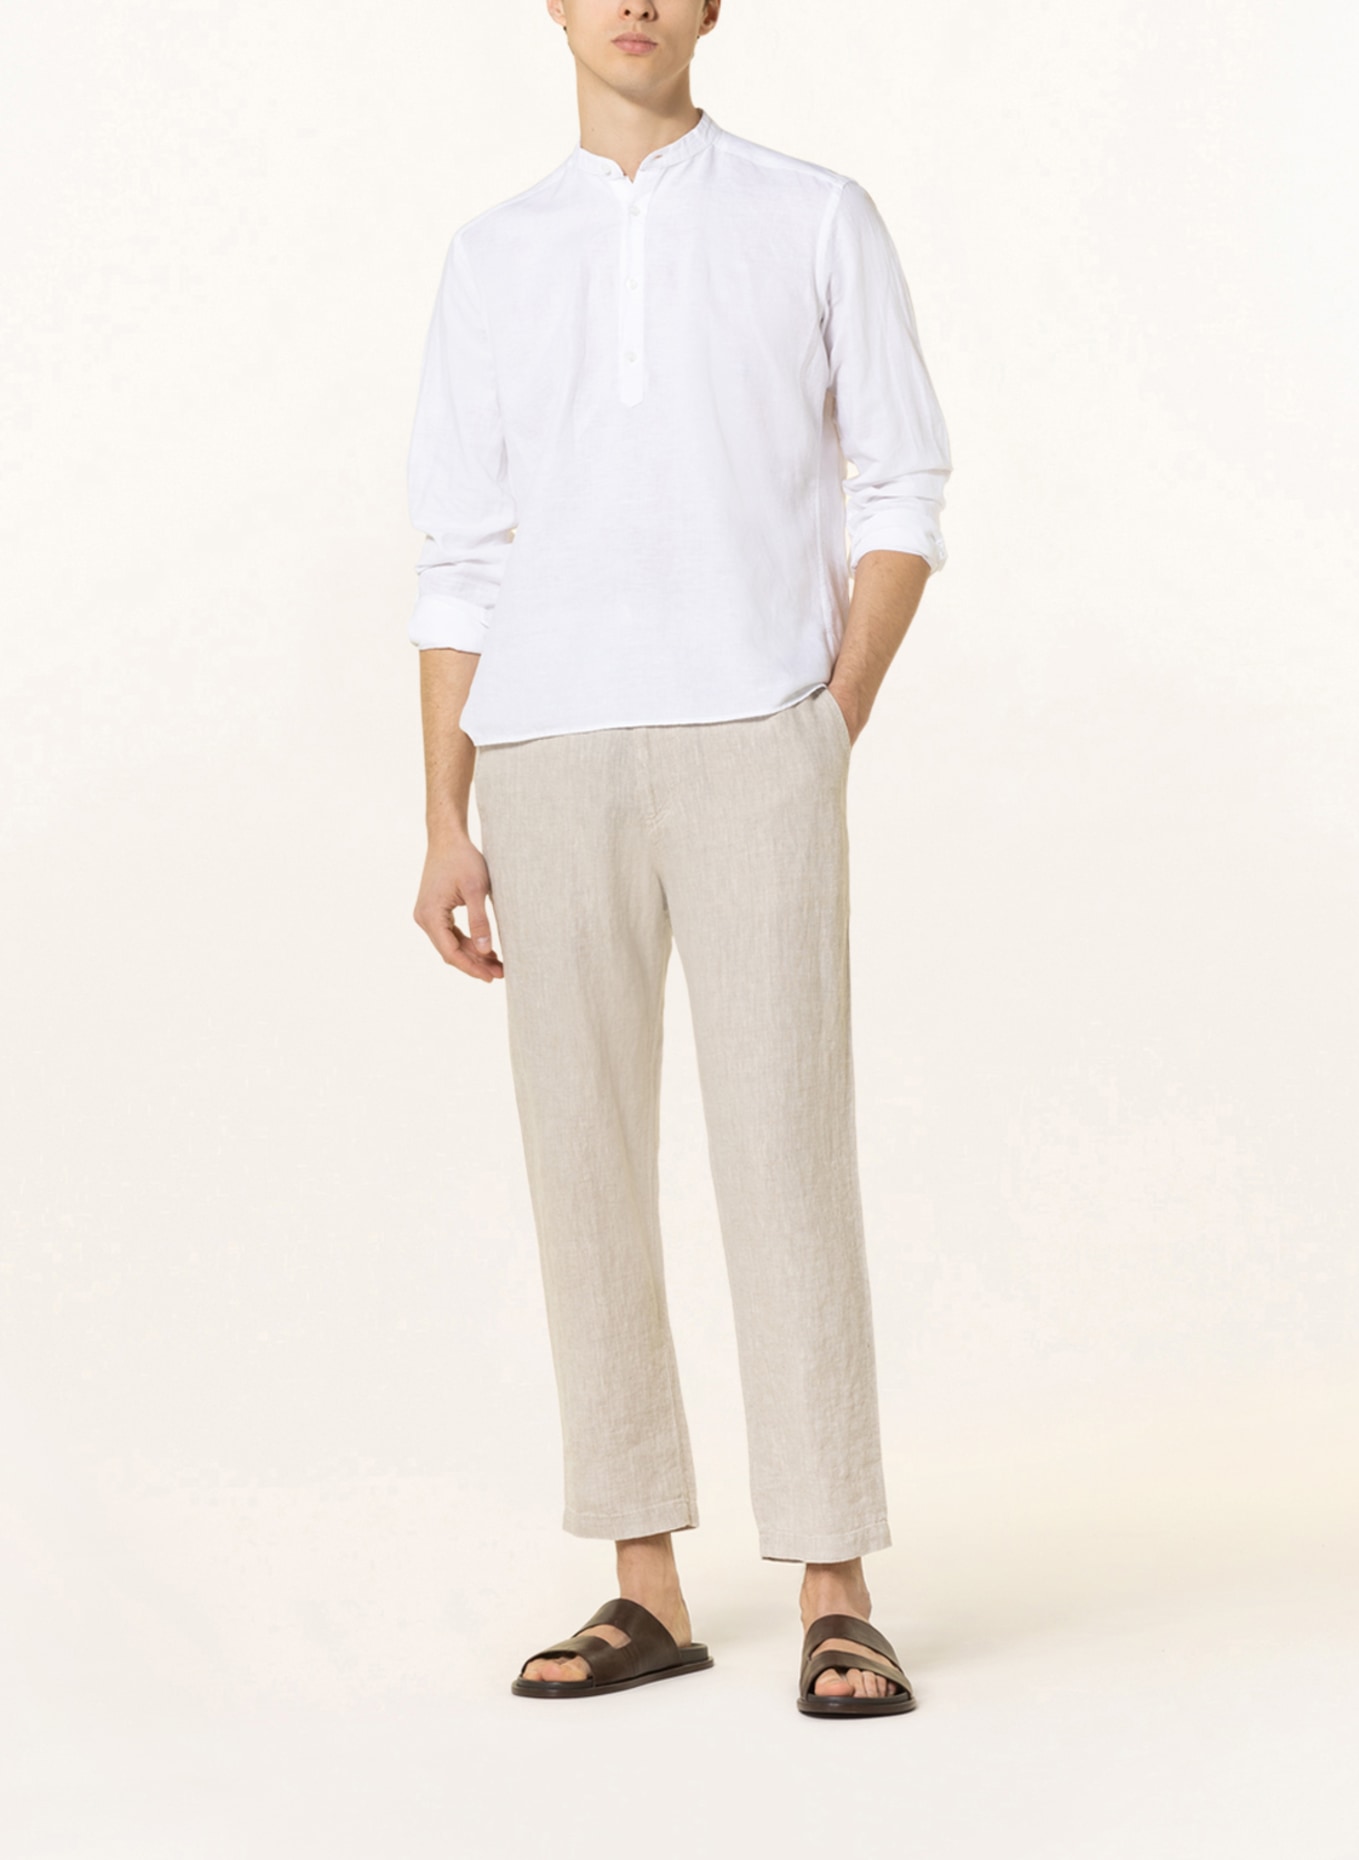 STROKESMAN'S Shirt regular fit with linen, Color: WHITE (Image 2)